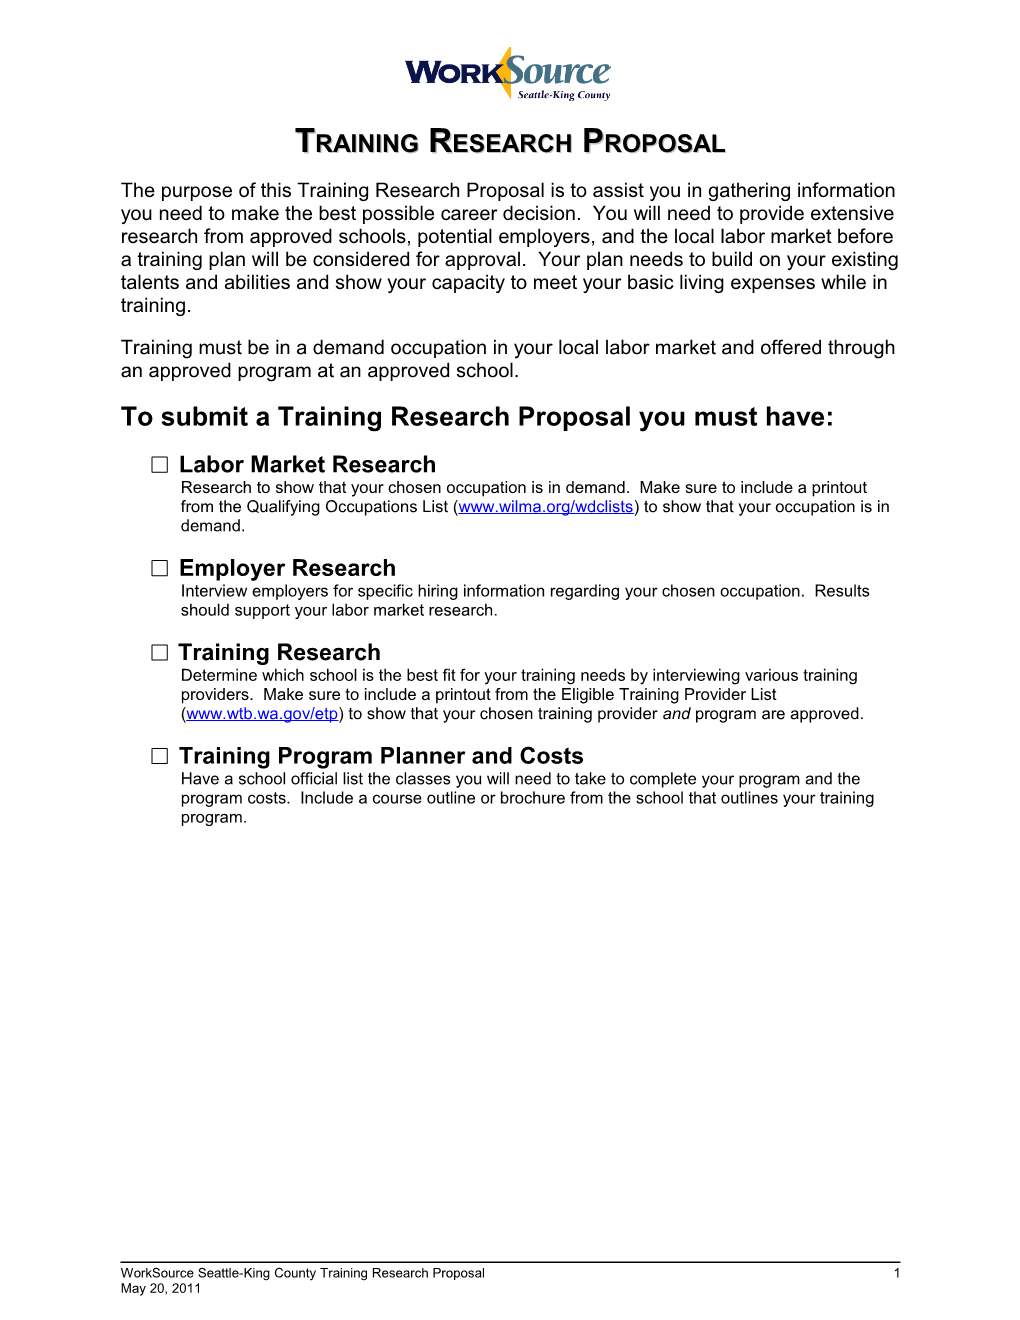 To Submit a Training Research Proposal You Must Have